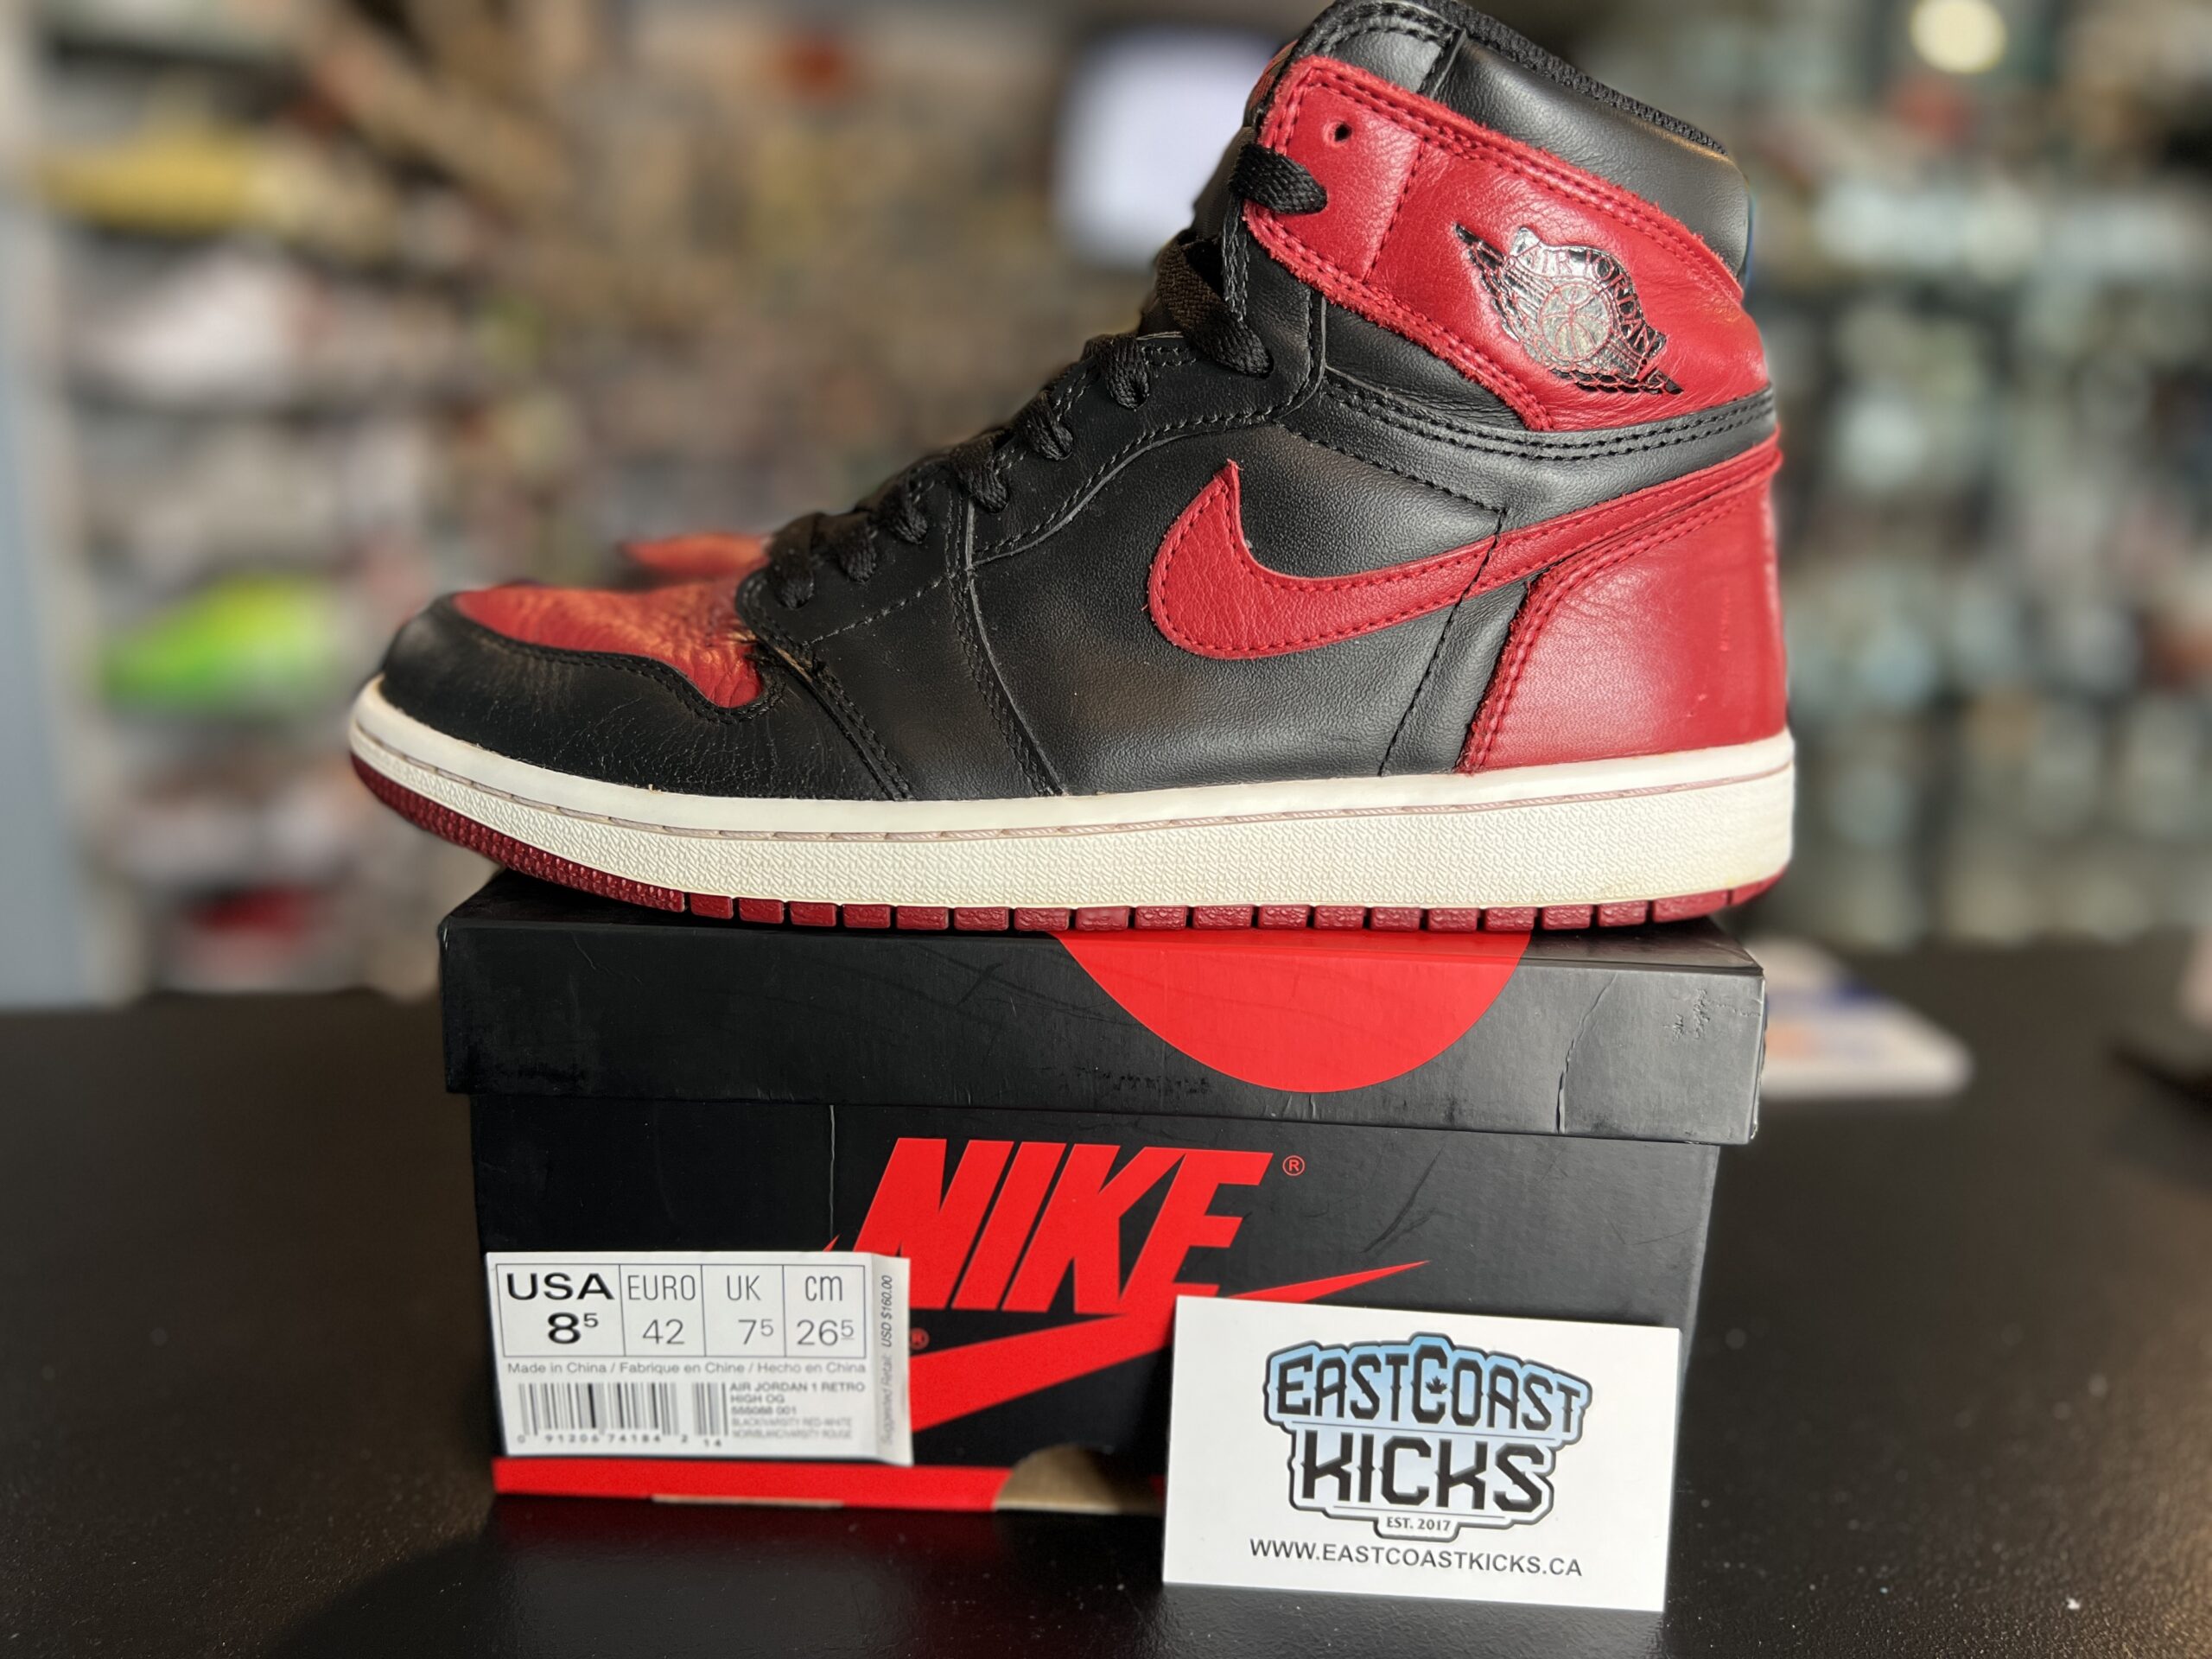 Preowned Jordan 1 Retro High Bred Banned 2016 Size 8.5